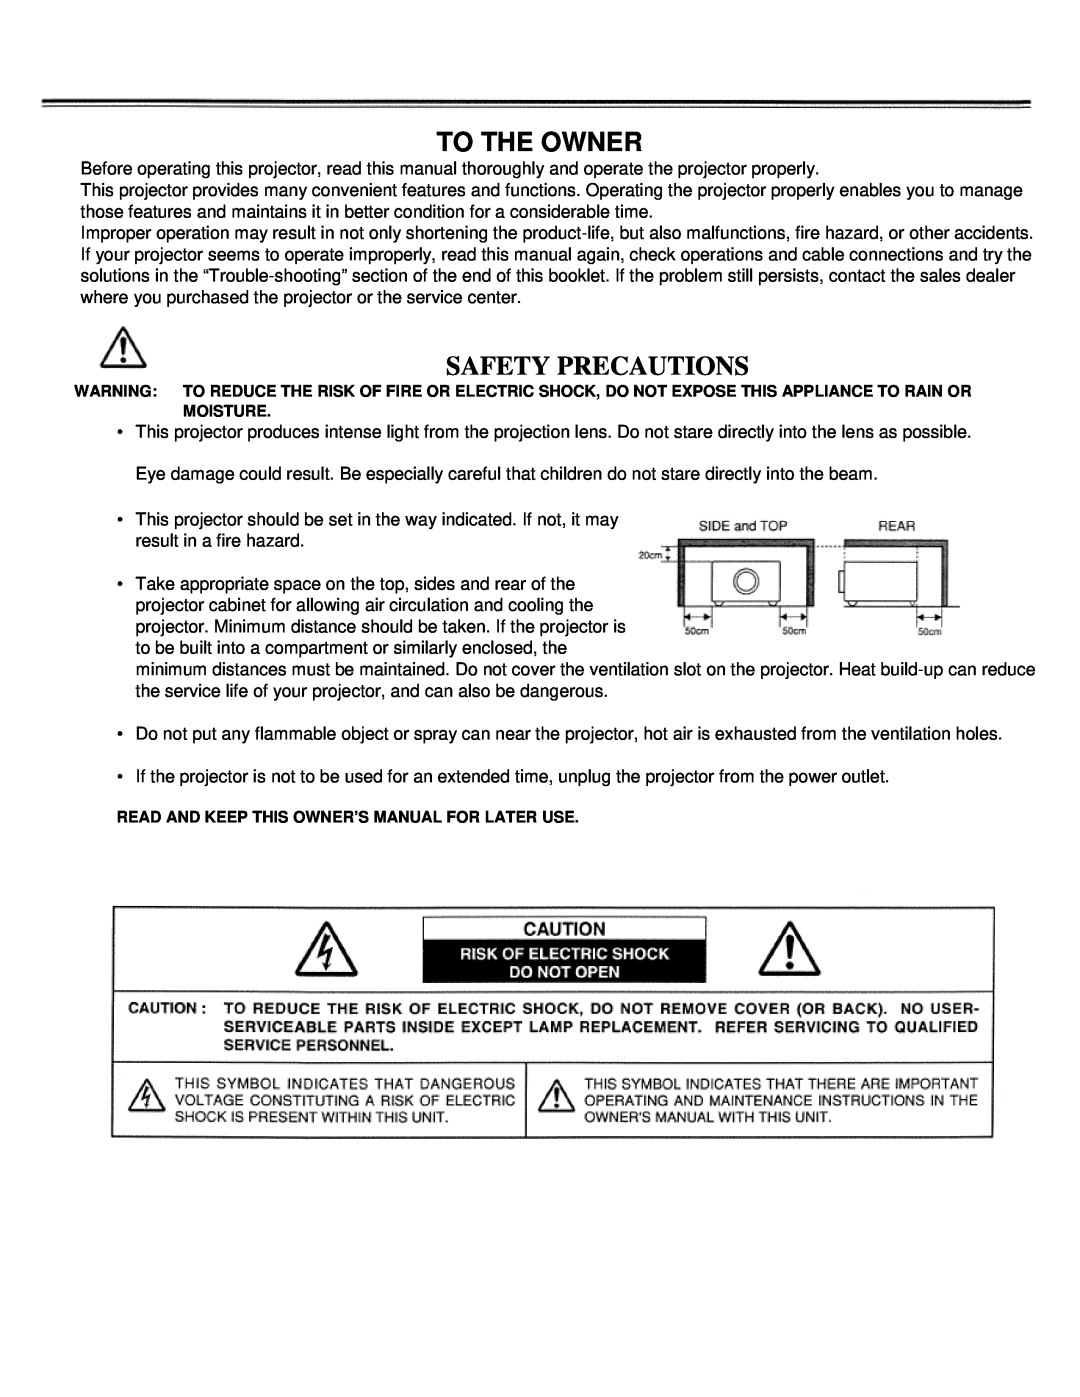 Eiki LC-VC1 owner manual To The Owner, Safety Precautions 